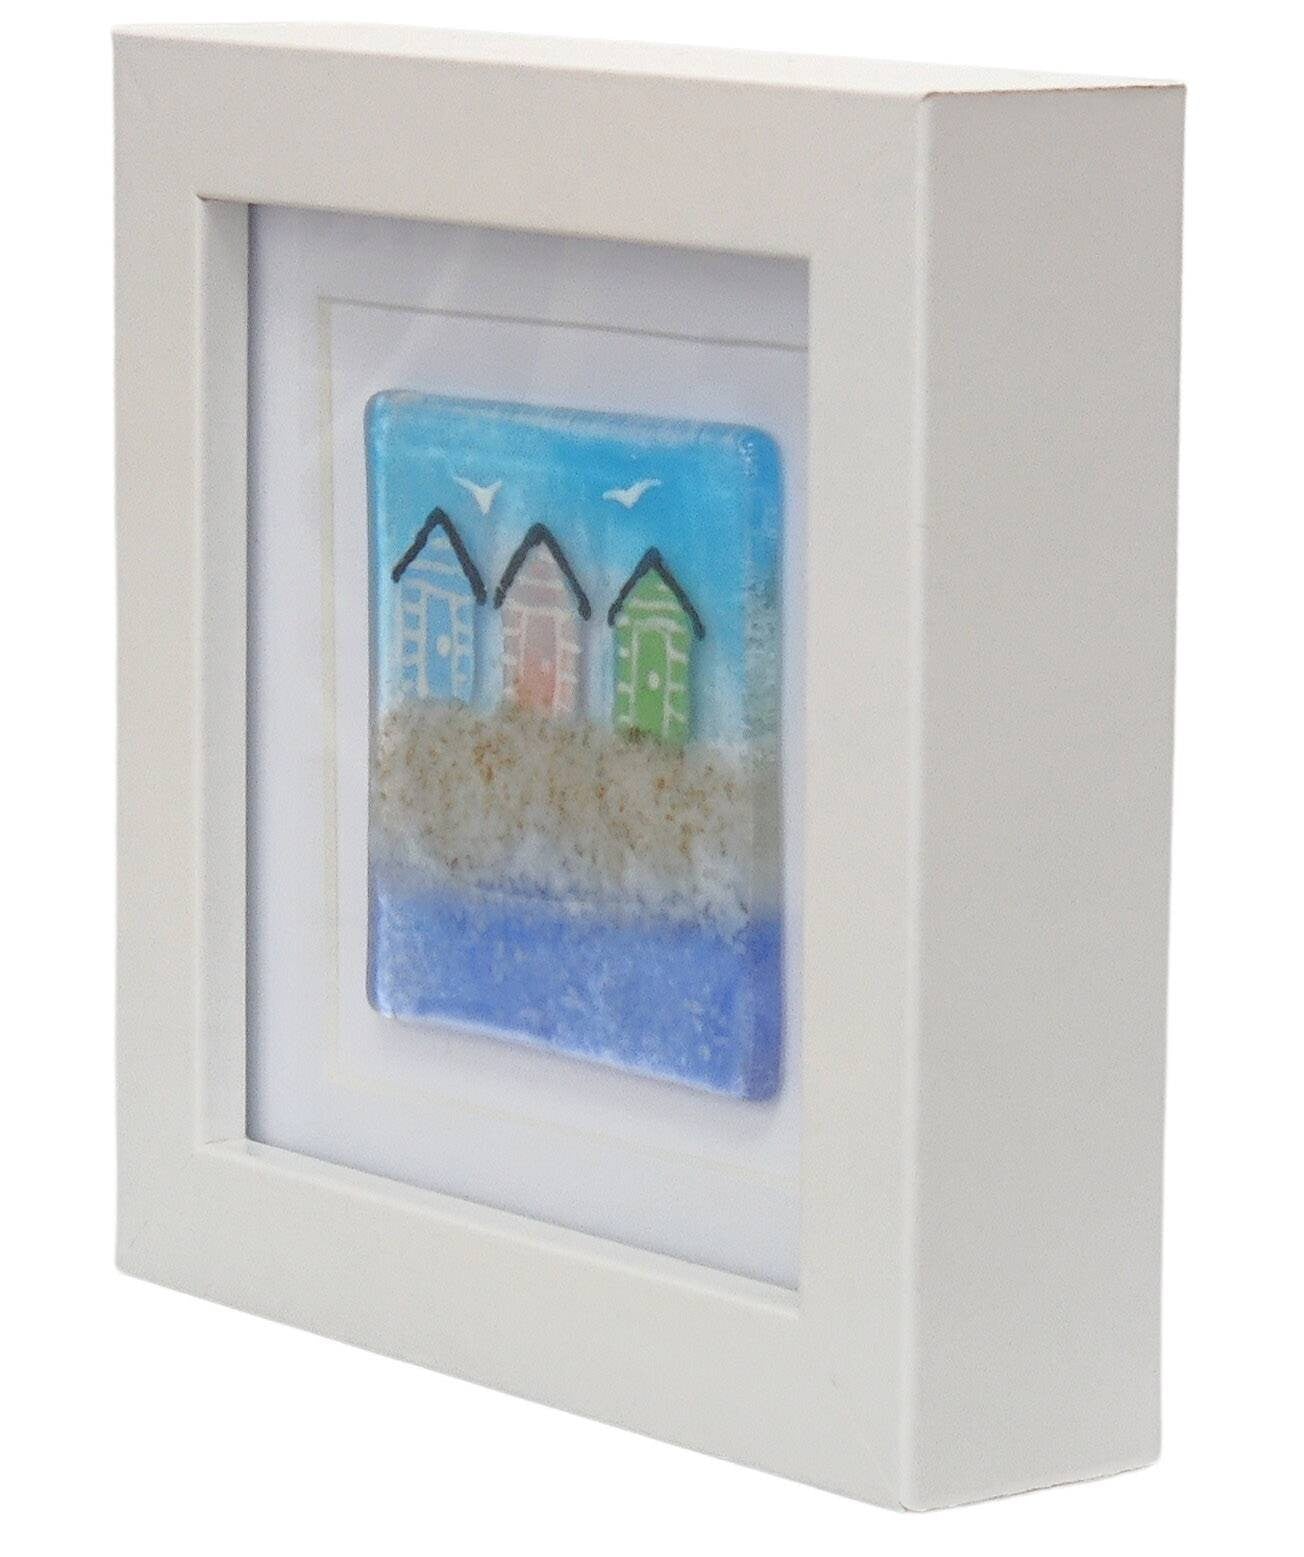 Fused glass small framed picture, mini fused glass gift, beach hut picture, fused glass seaside picture